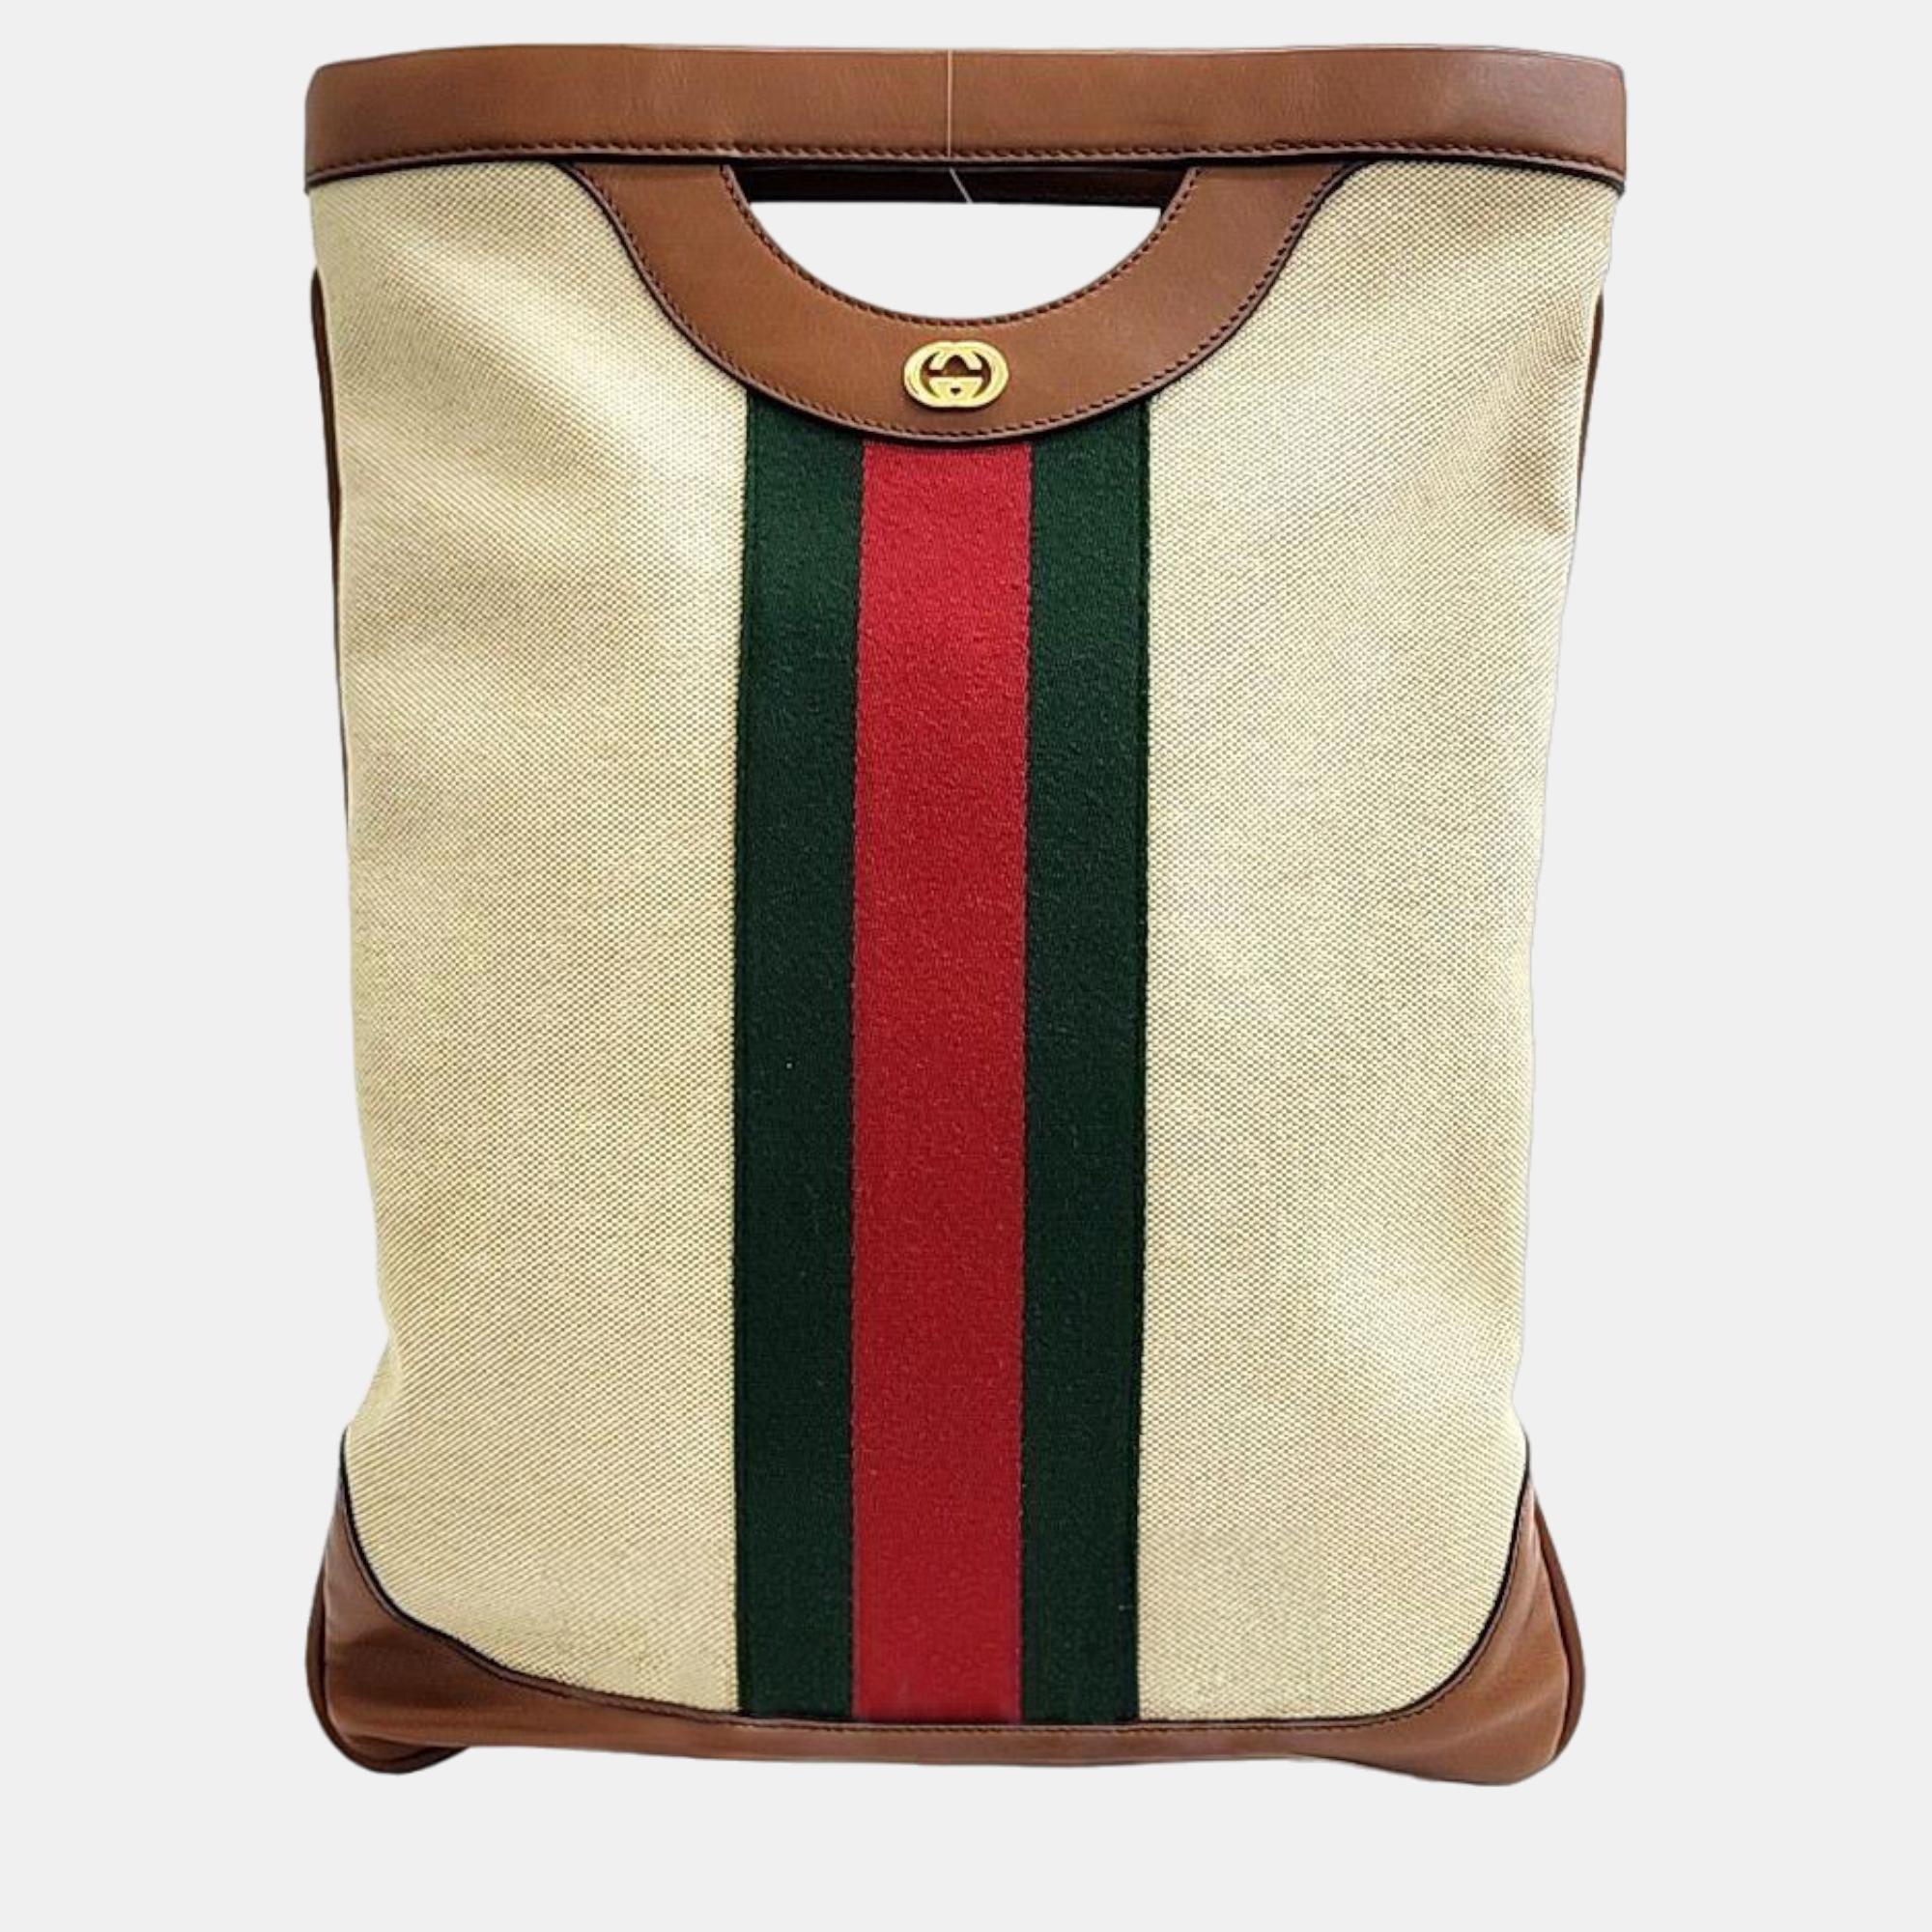 Gucci web tote and chain shoulder bag (564604)